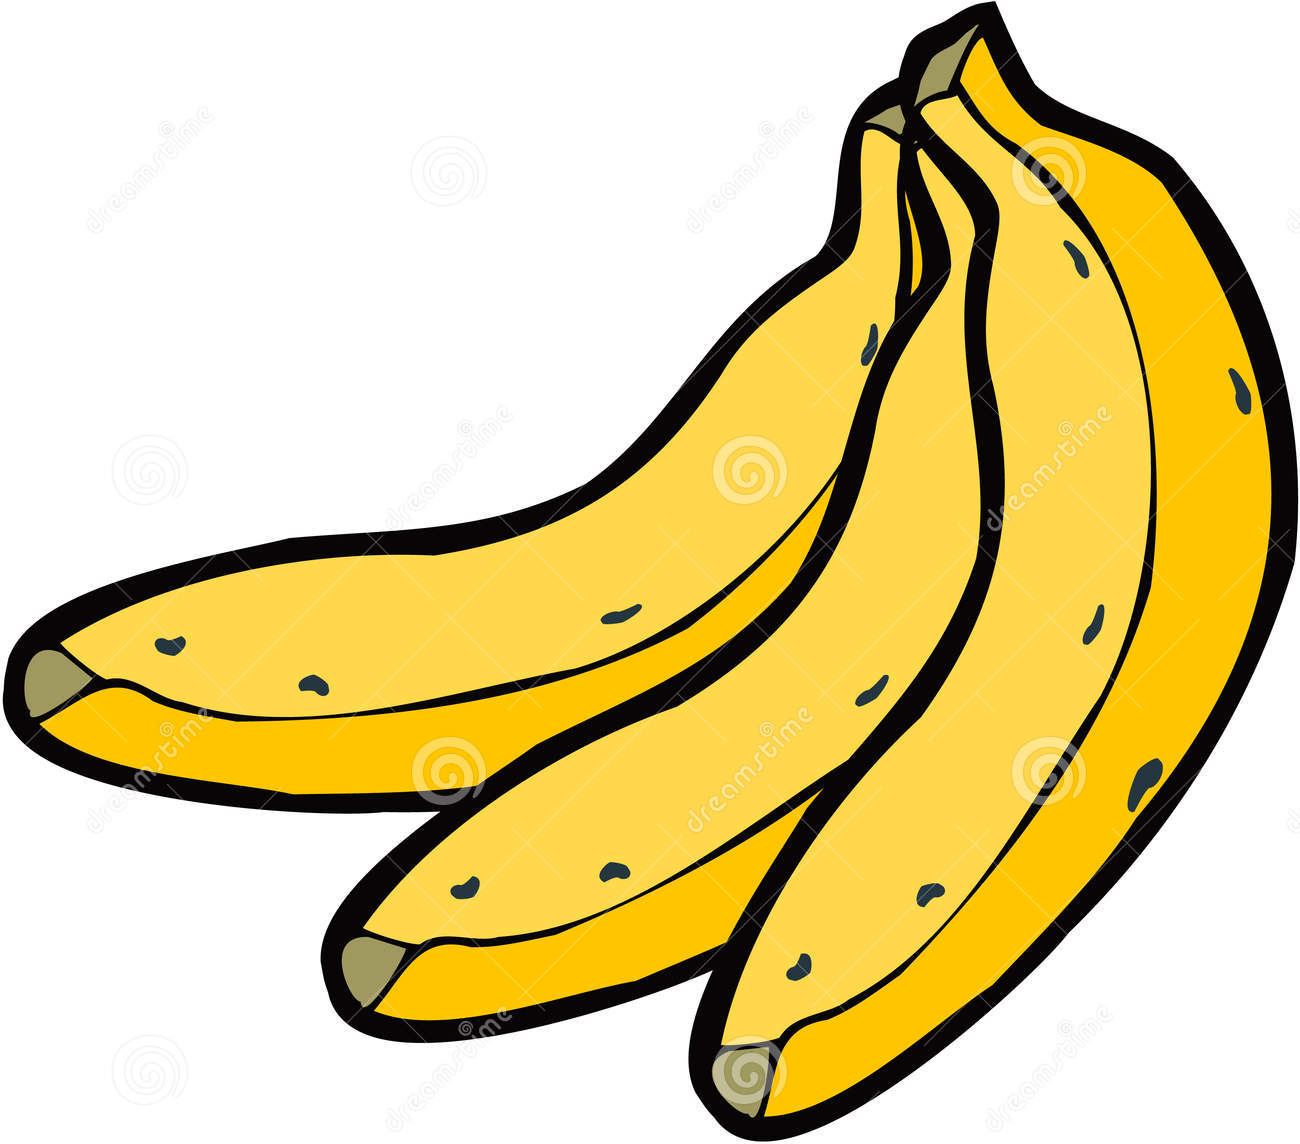 Banana Clipart Black And White | Clipart Panda - Free Clipart Images